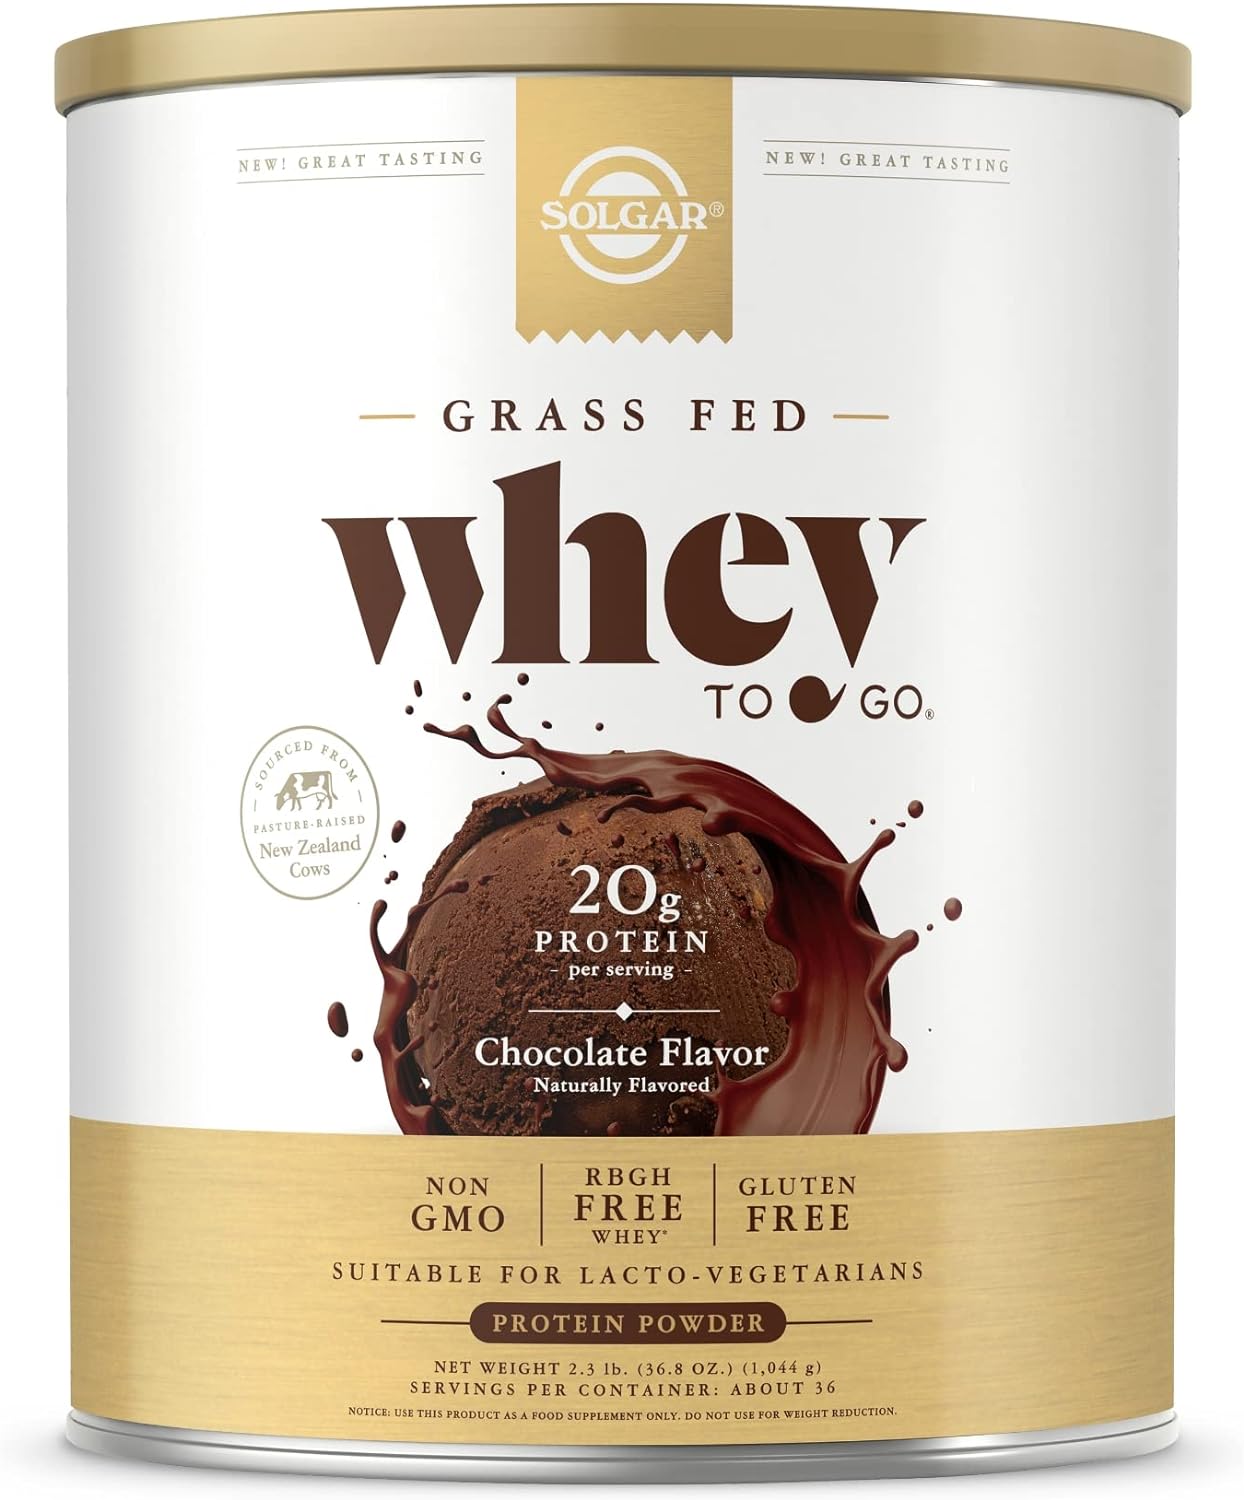 Solgar Grass Fed Whey to Go, Chocolate - 2.3 lb - Grass-Fed Whey Prote